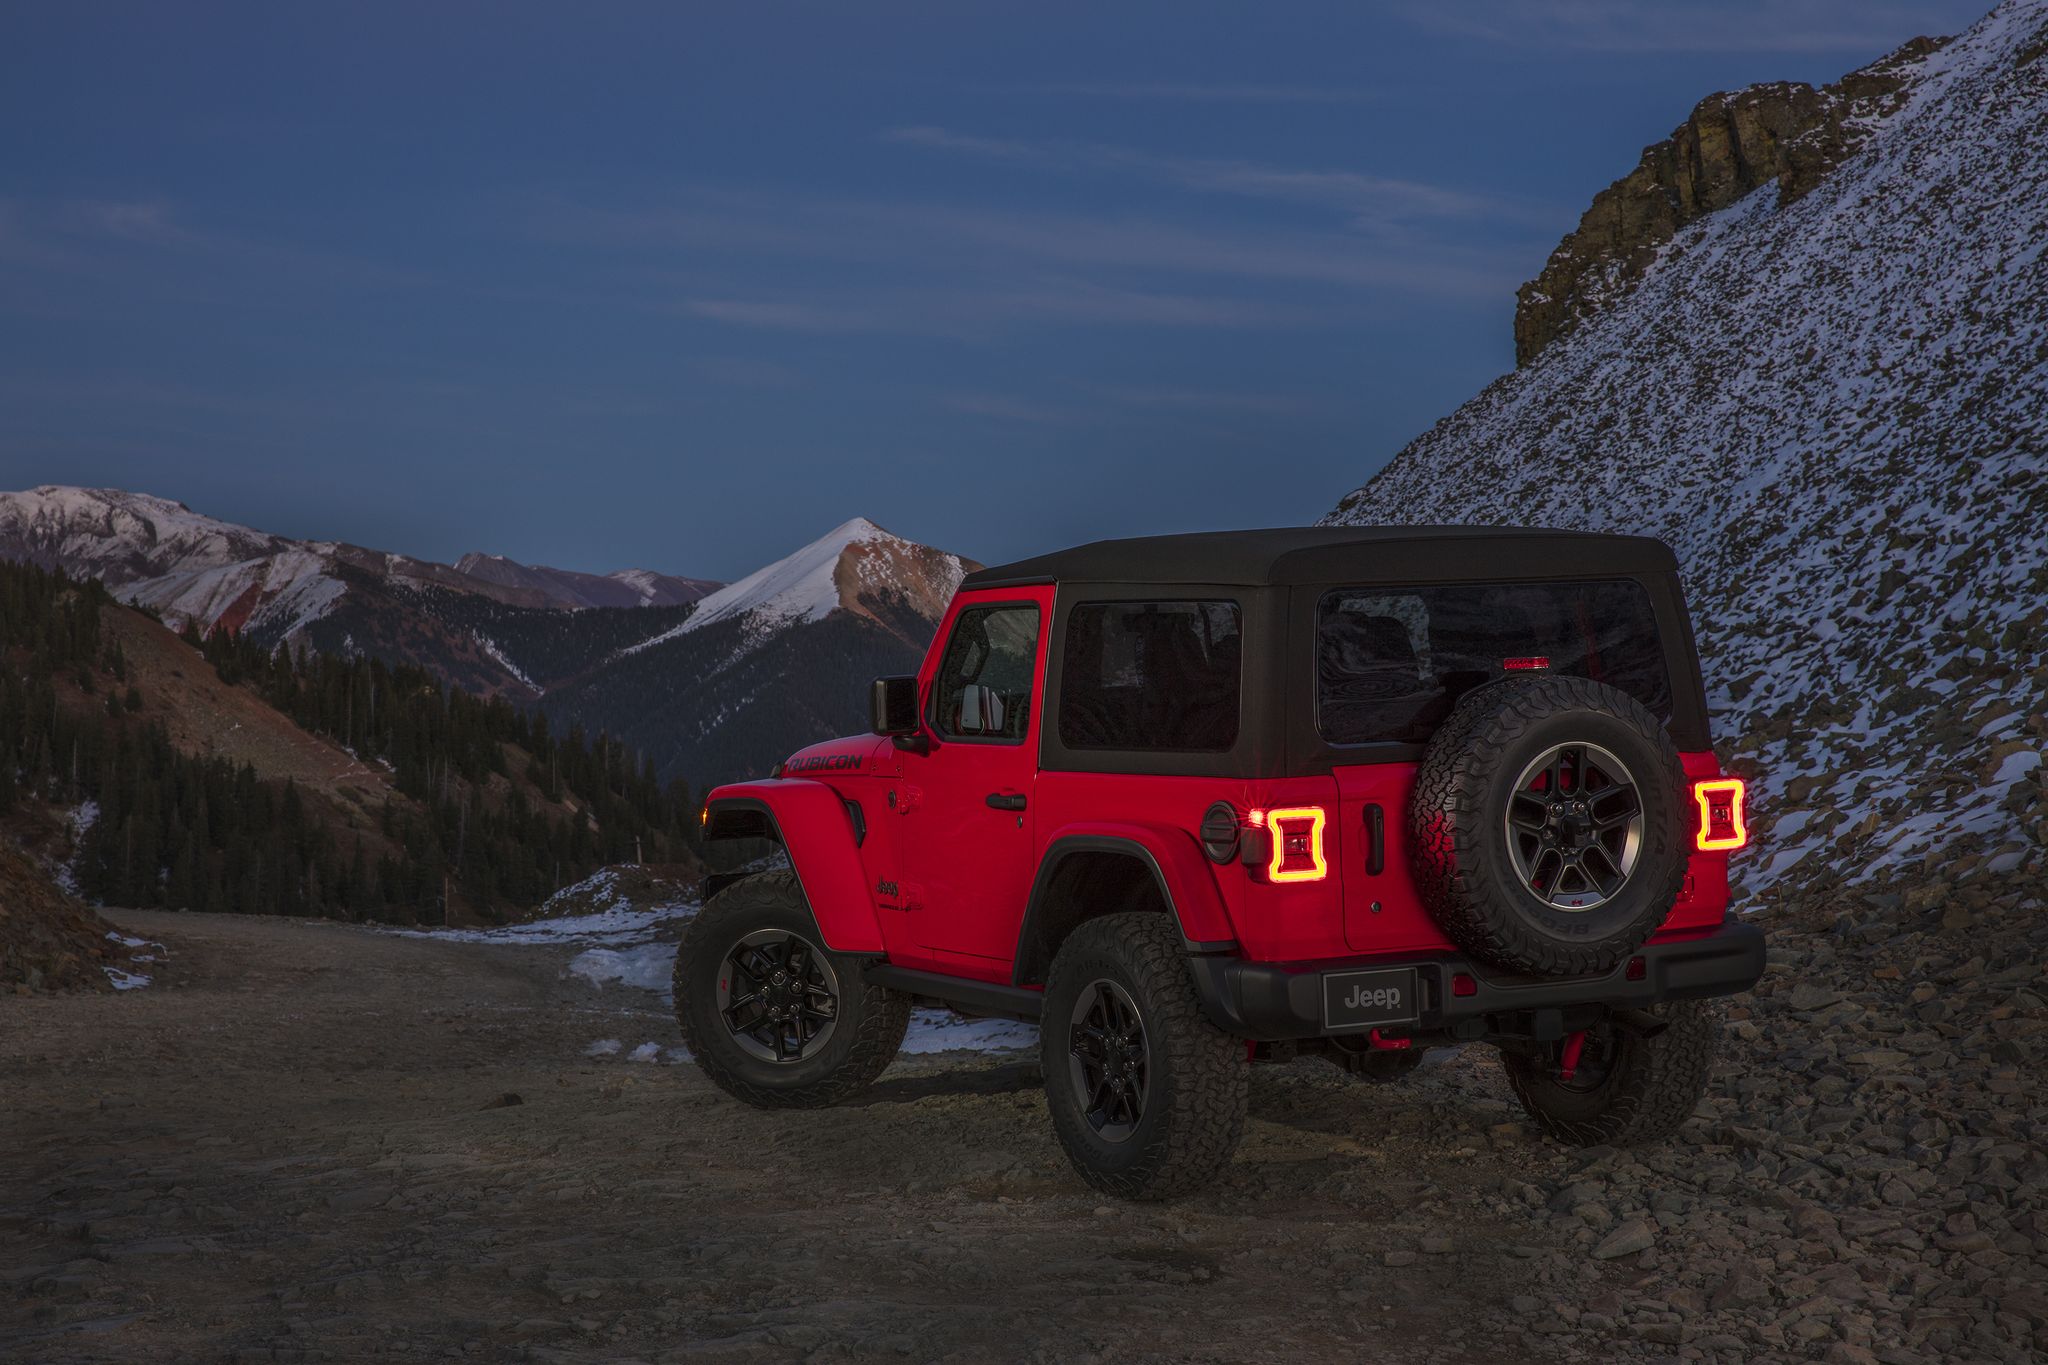 2018 Jeep Wrangler Price, Value, Ratings & Reviews